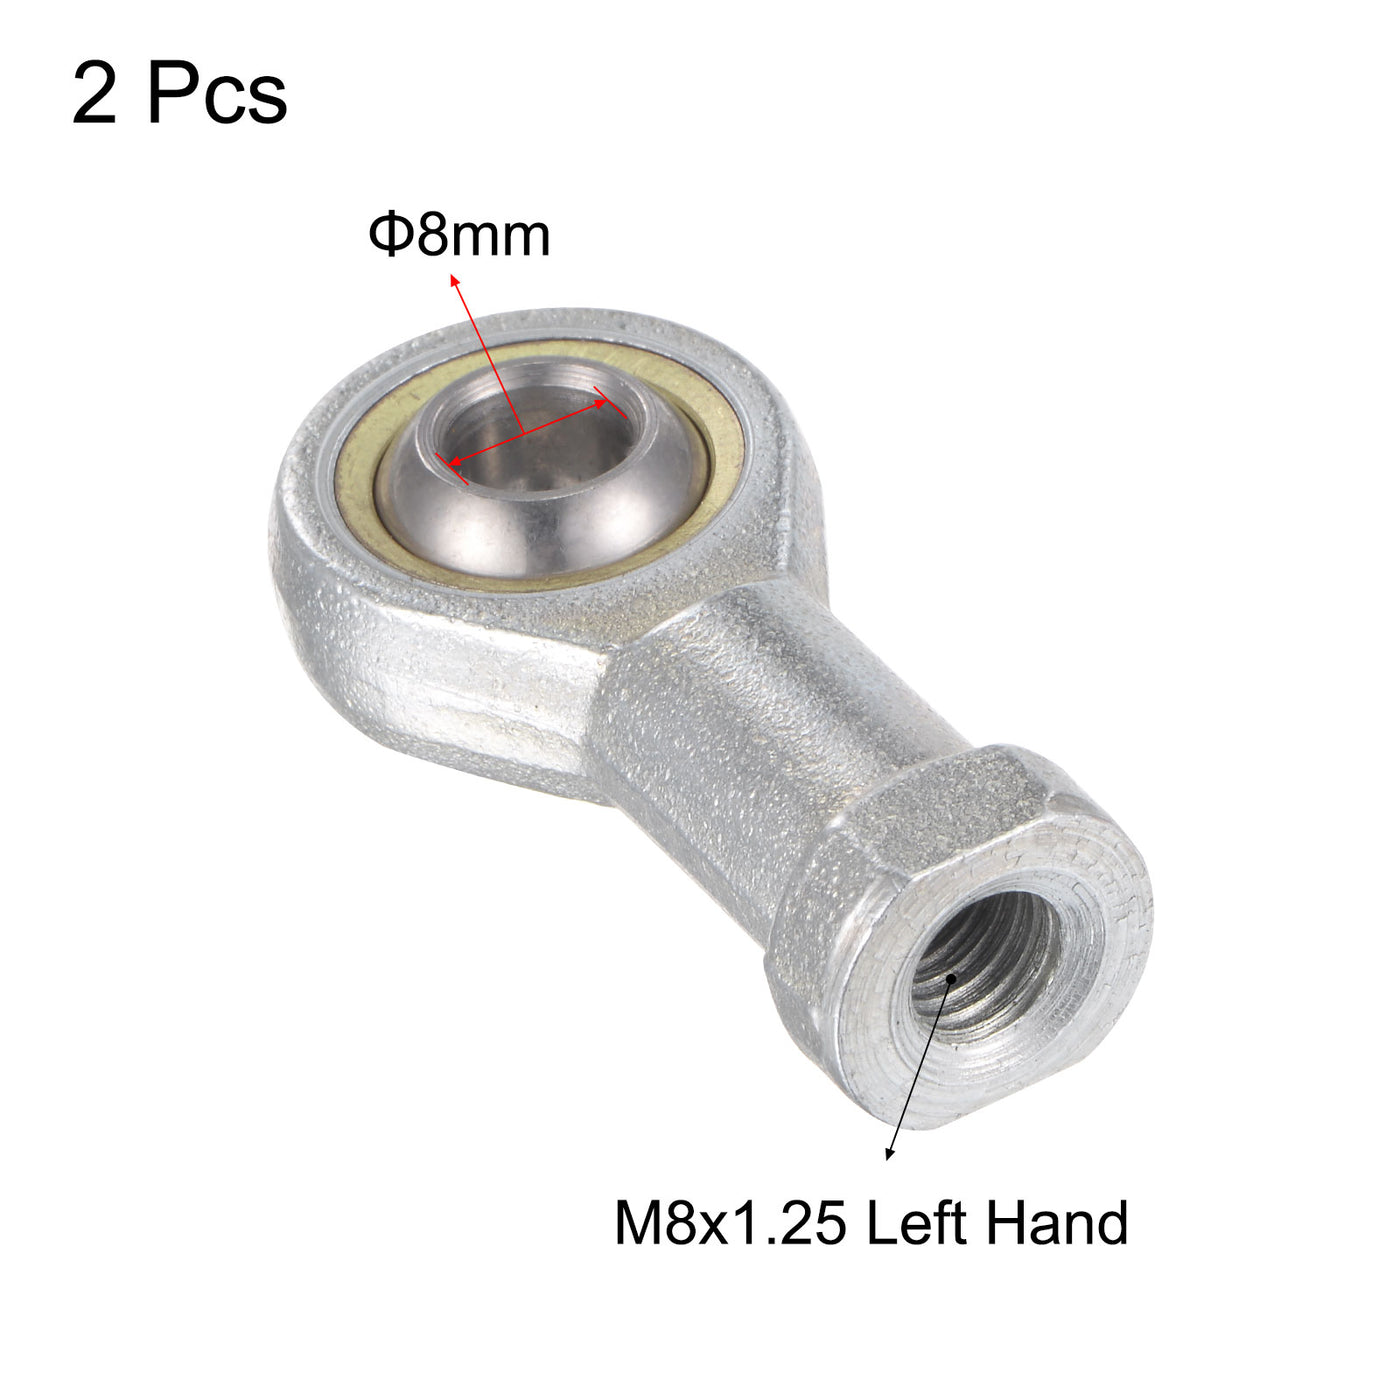 uxcell Uxcell 2pcs SI8TK PHSA8 Rod End Bearing 8mm Bore M8x1.25 Left Hand Female Thread